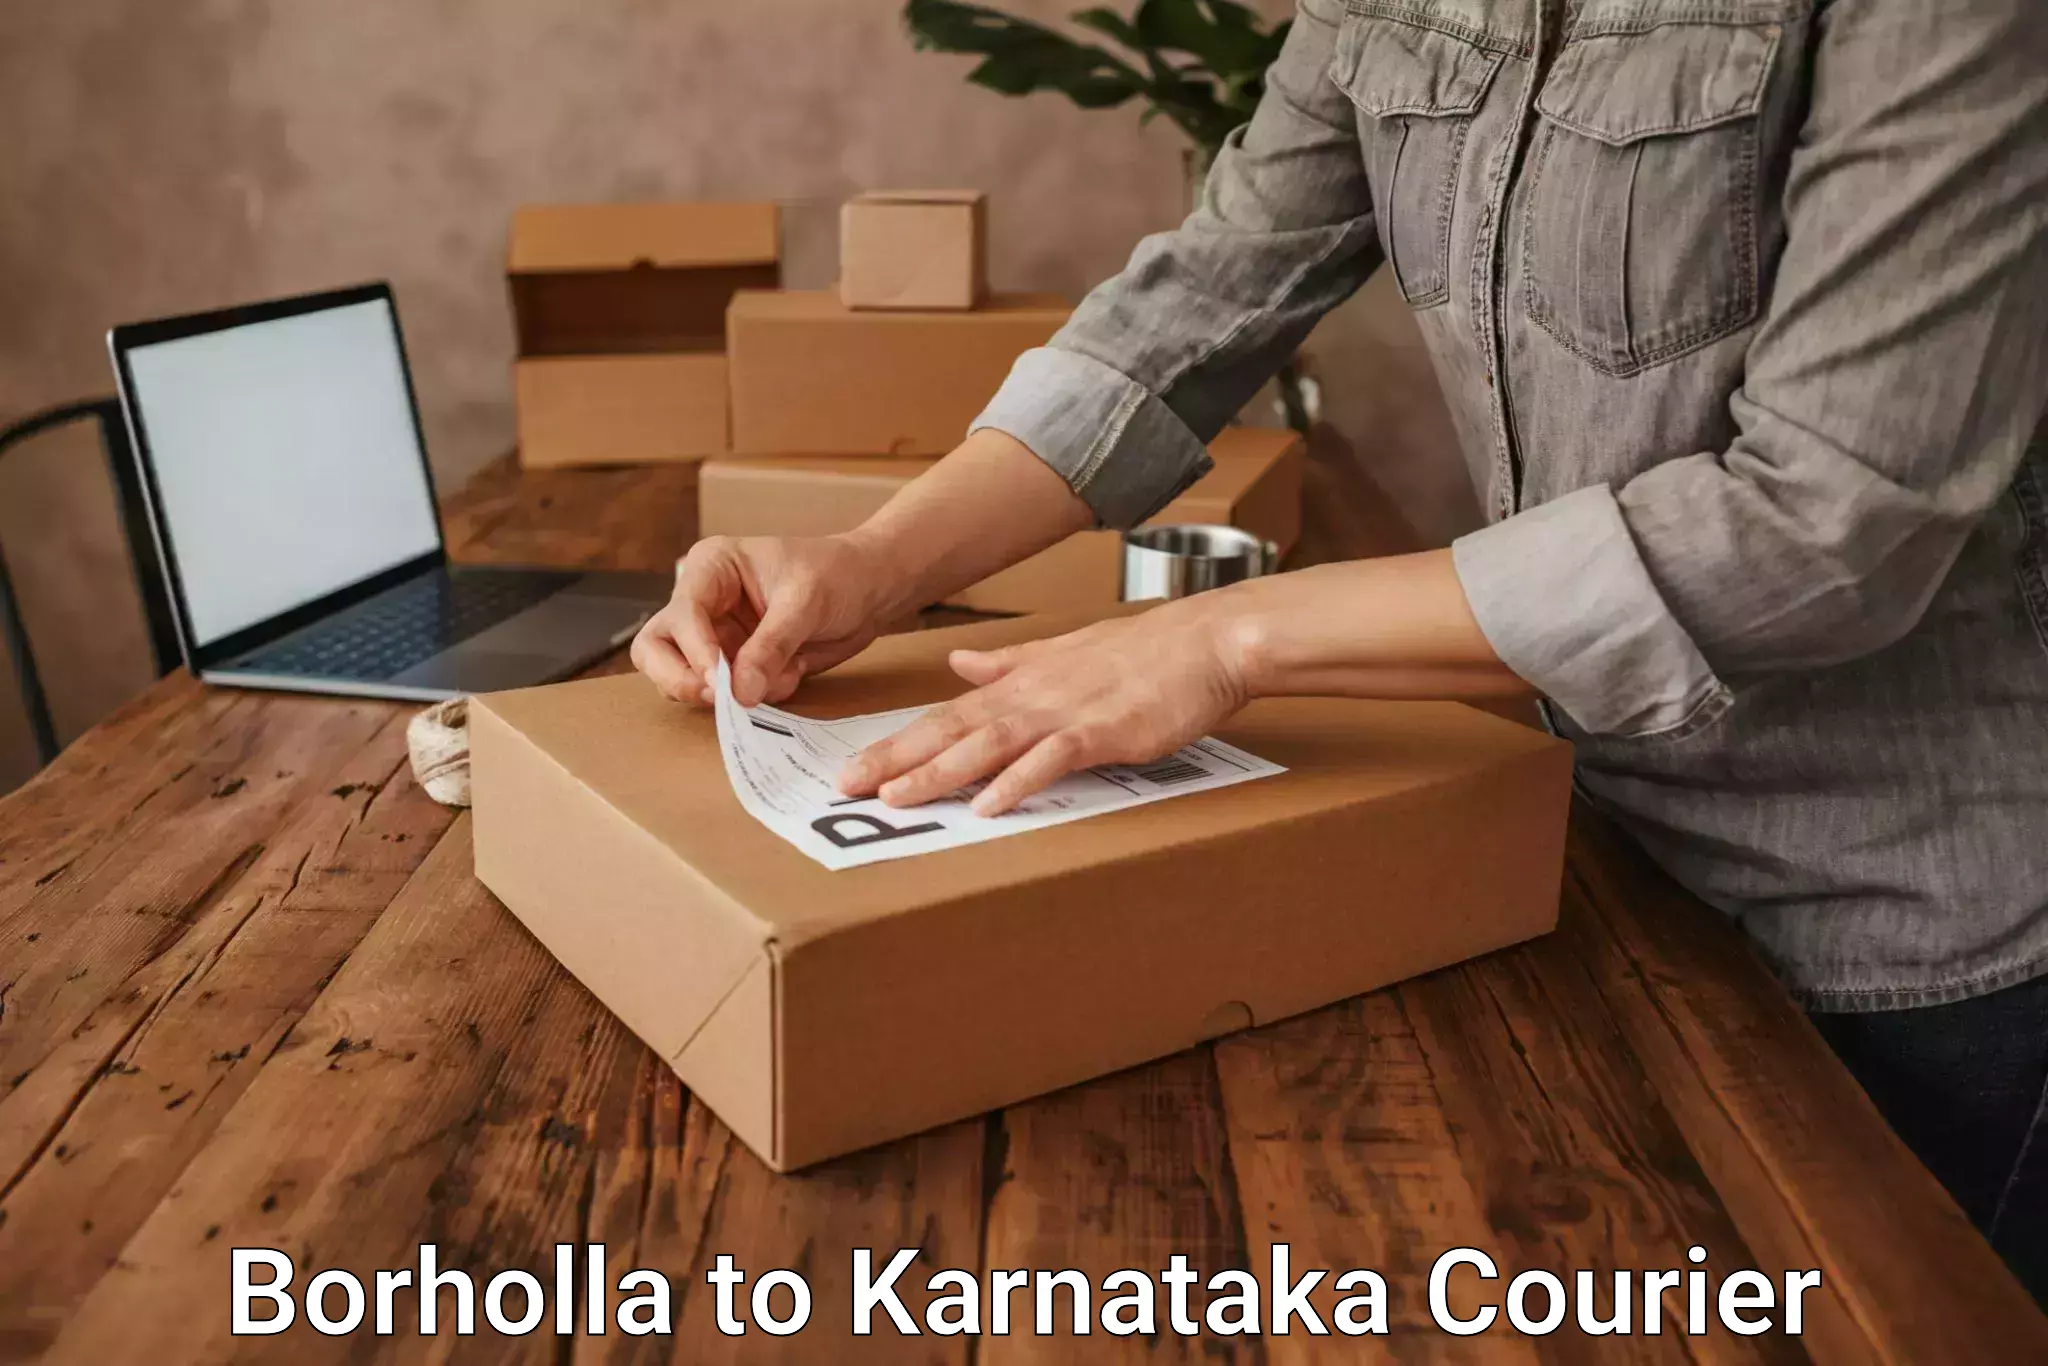 Cash on delivery service Borholla to Bengaluru